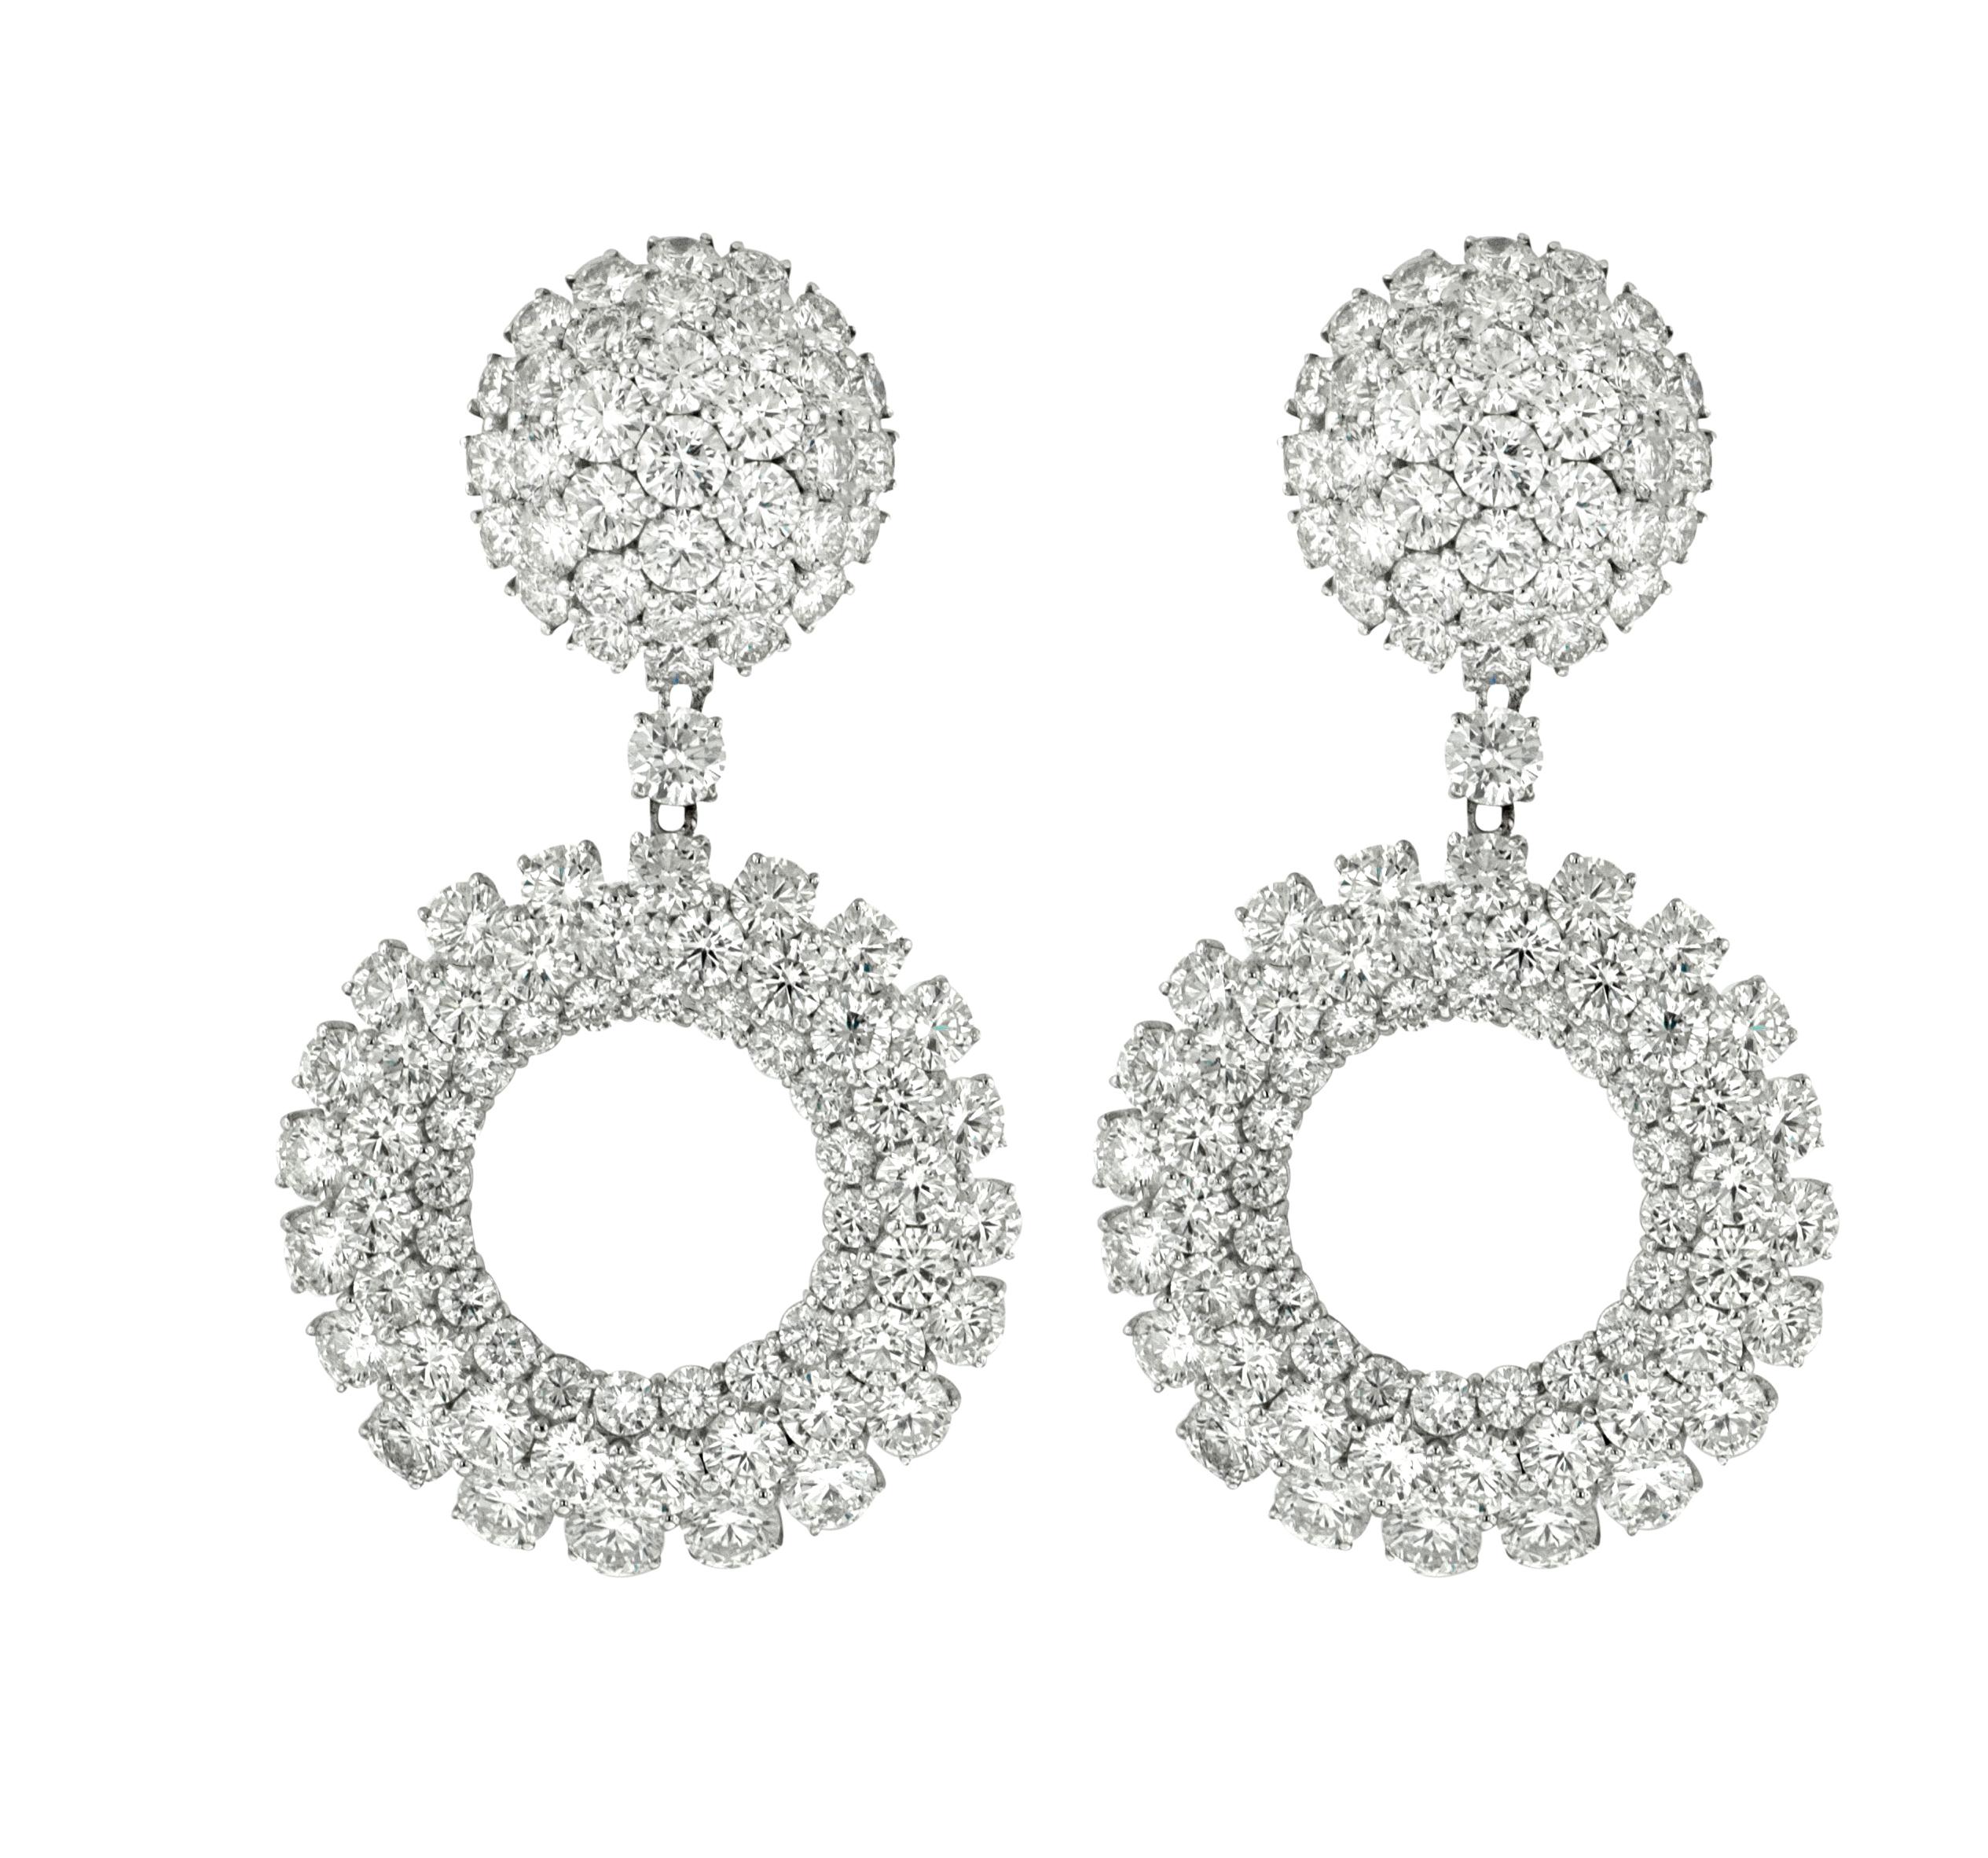 Circle Pave Fashion Diamond Earrings with Brilliant Cut Diamonds in White Gold In New Condition For Sale In New York, NY